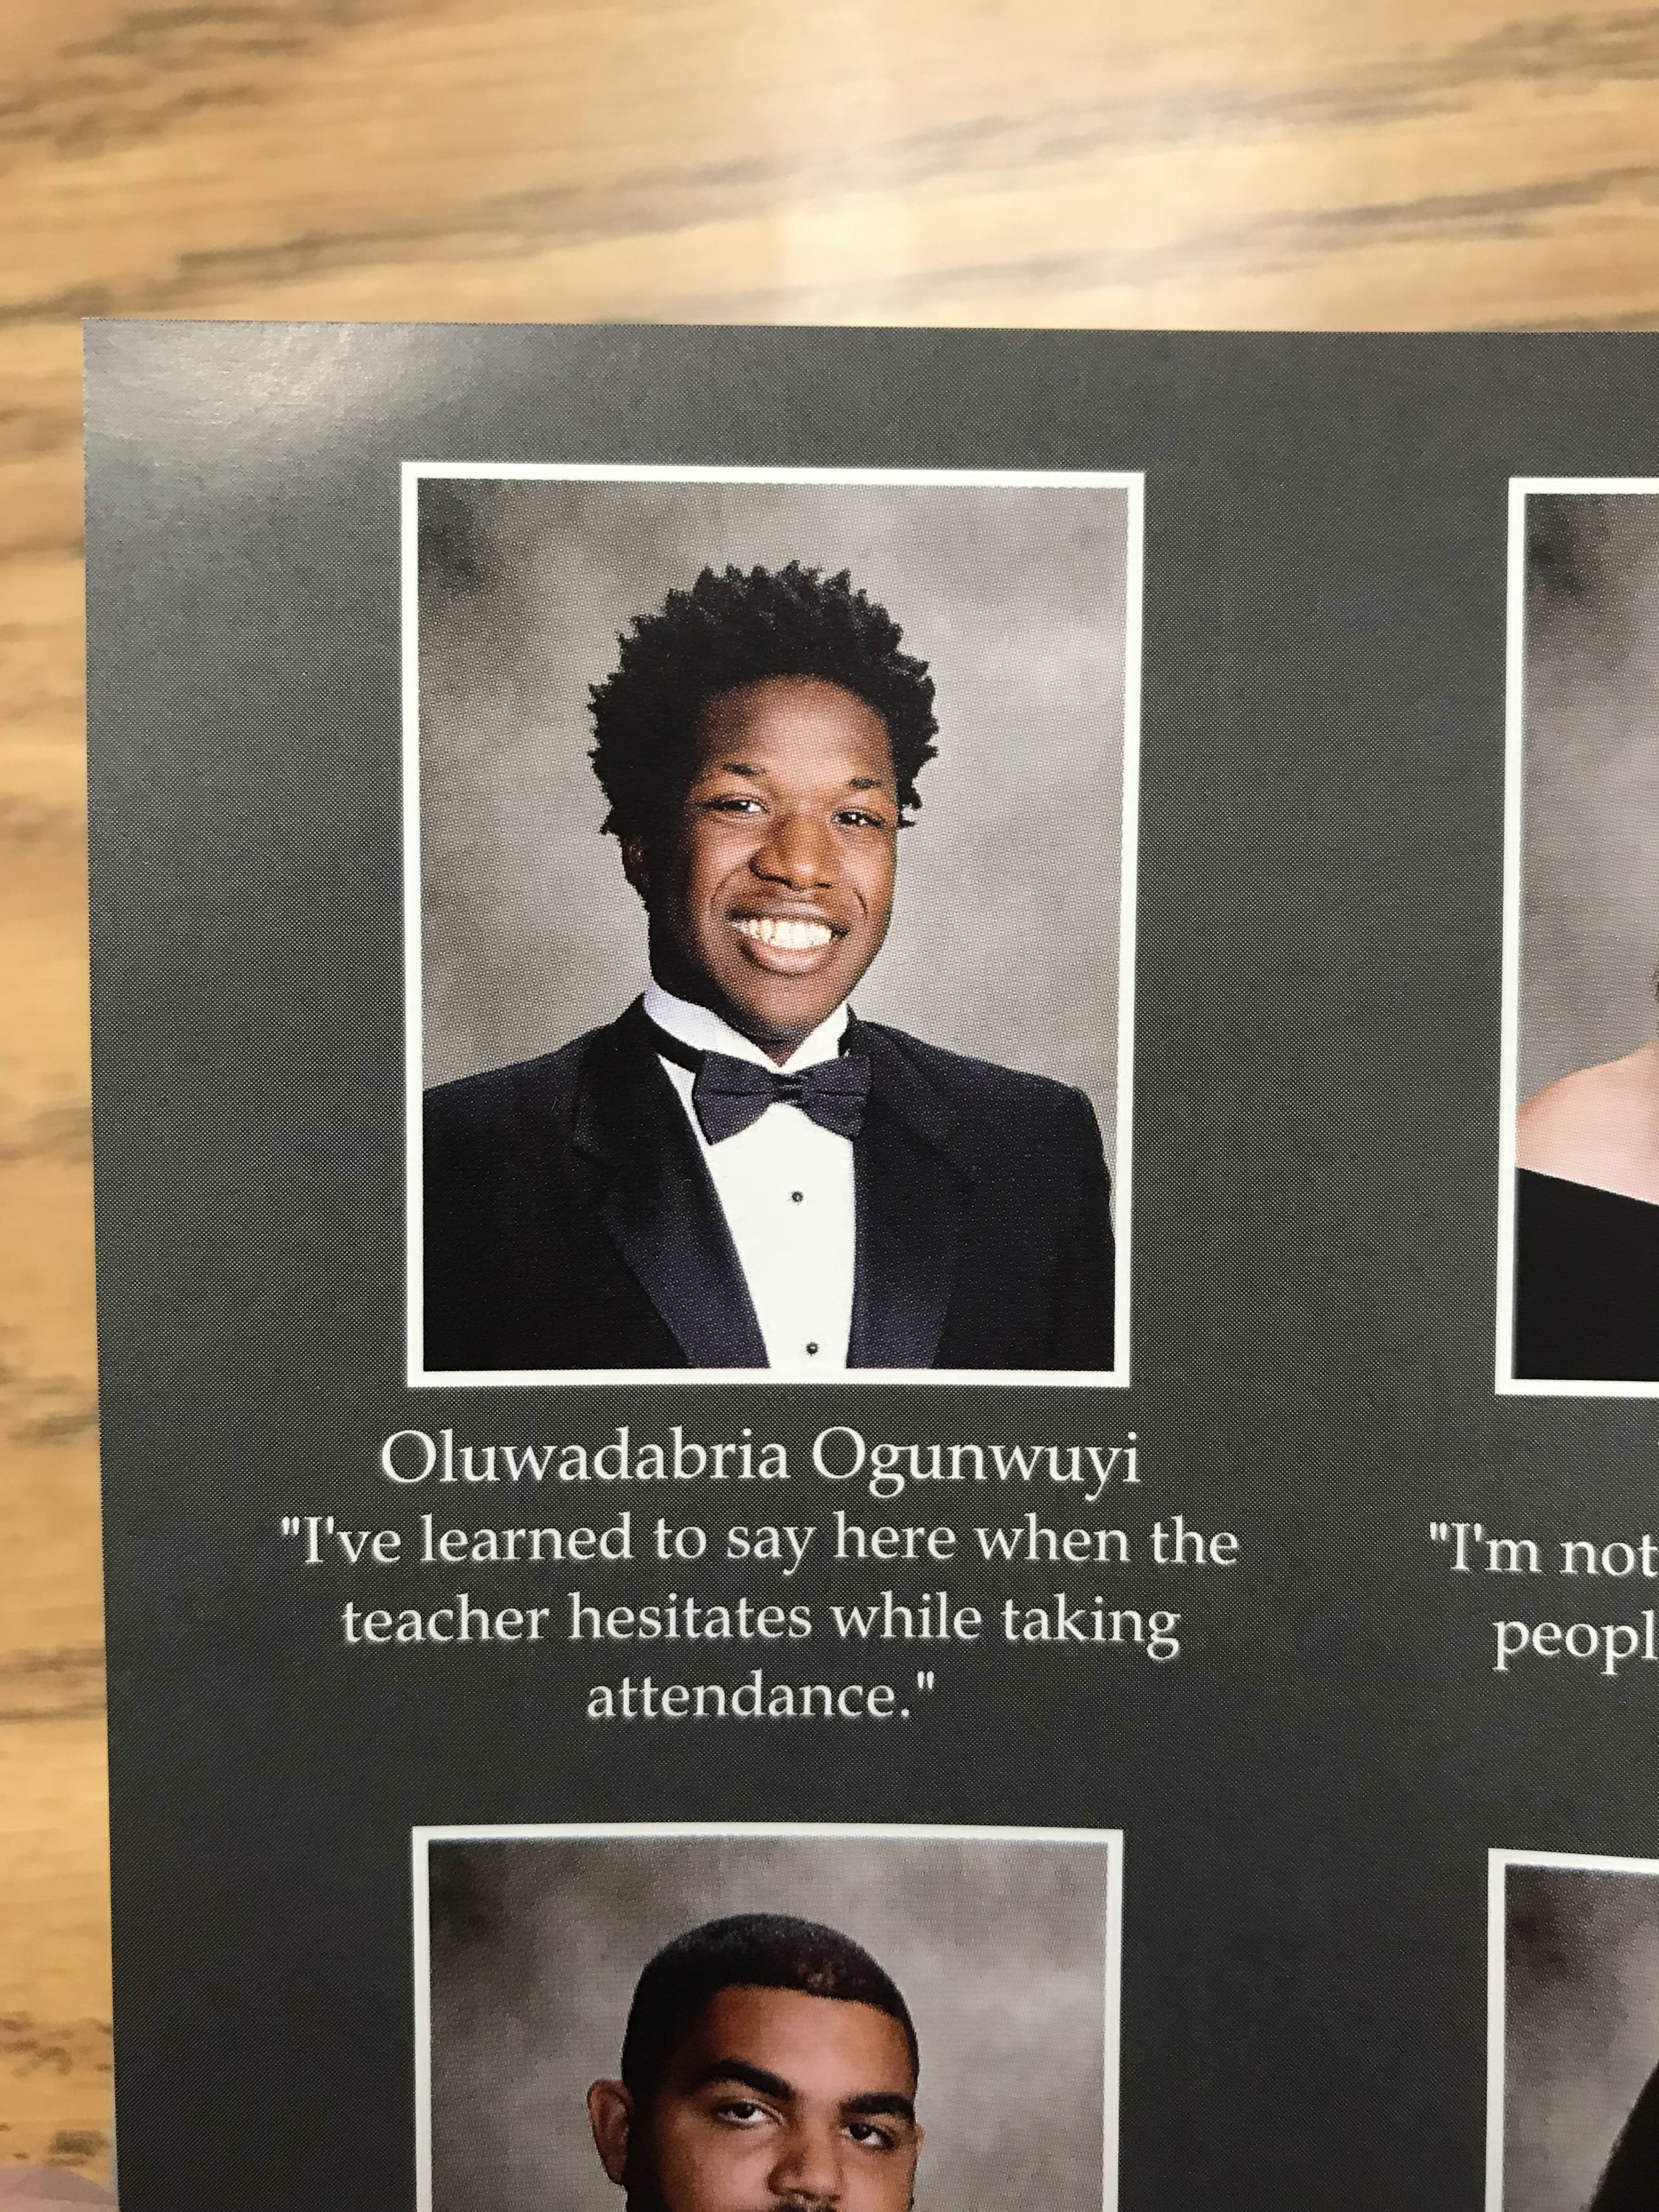 memes - best yearbook quotes - Oluwadabria Ogunwuyi "I've learned to say here when the teacher hesitates while taking attendance." "I'm not peopl